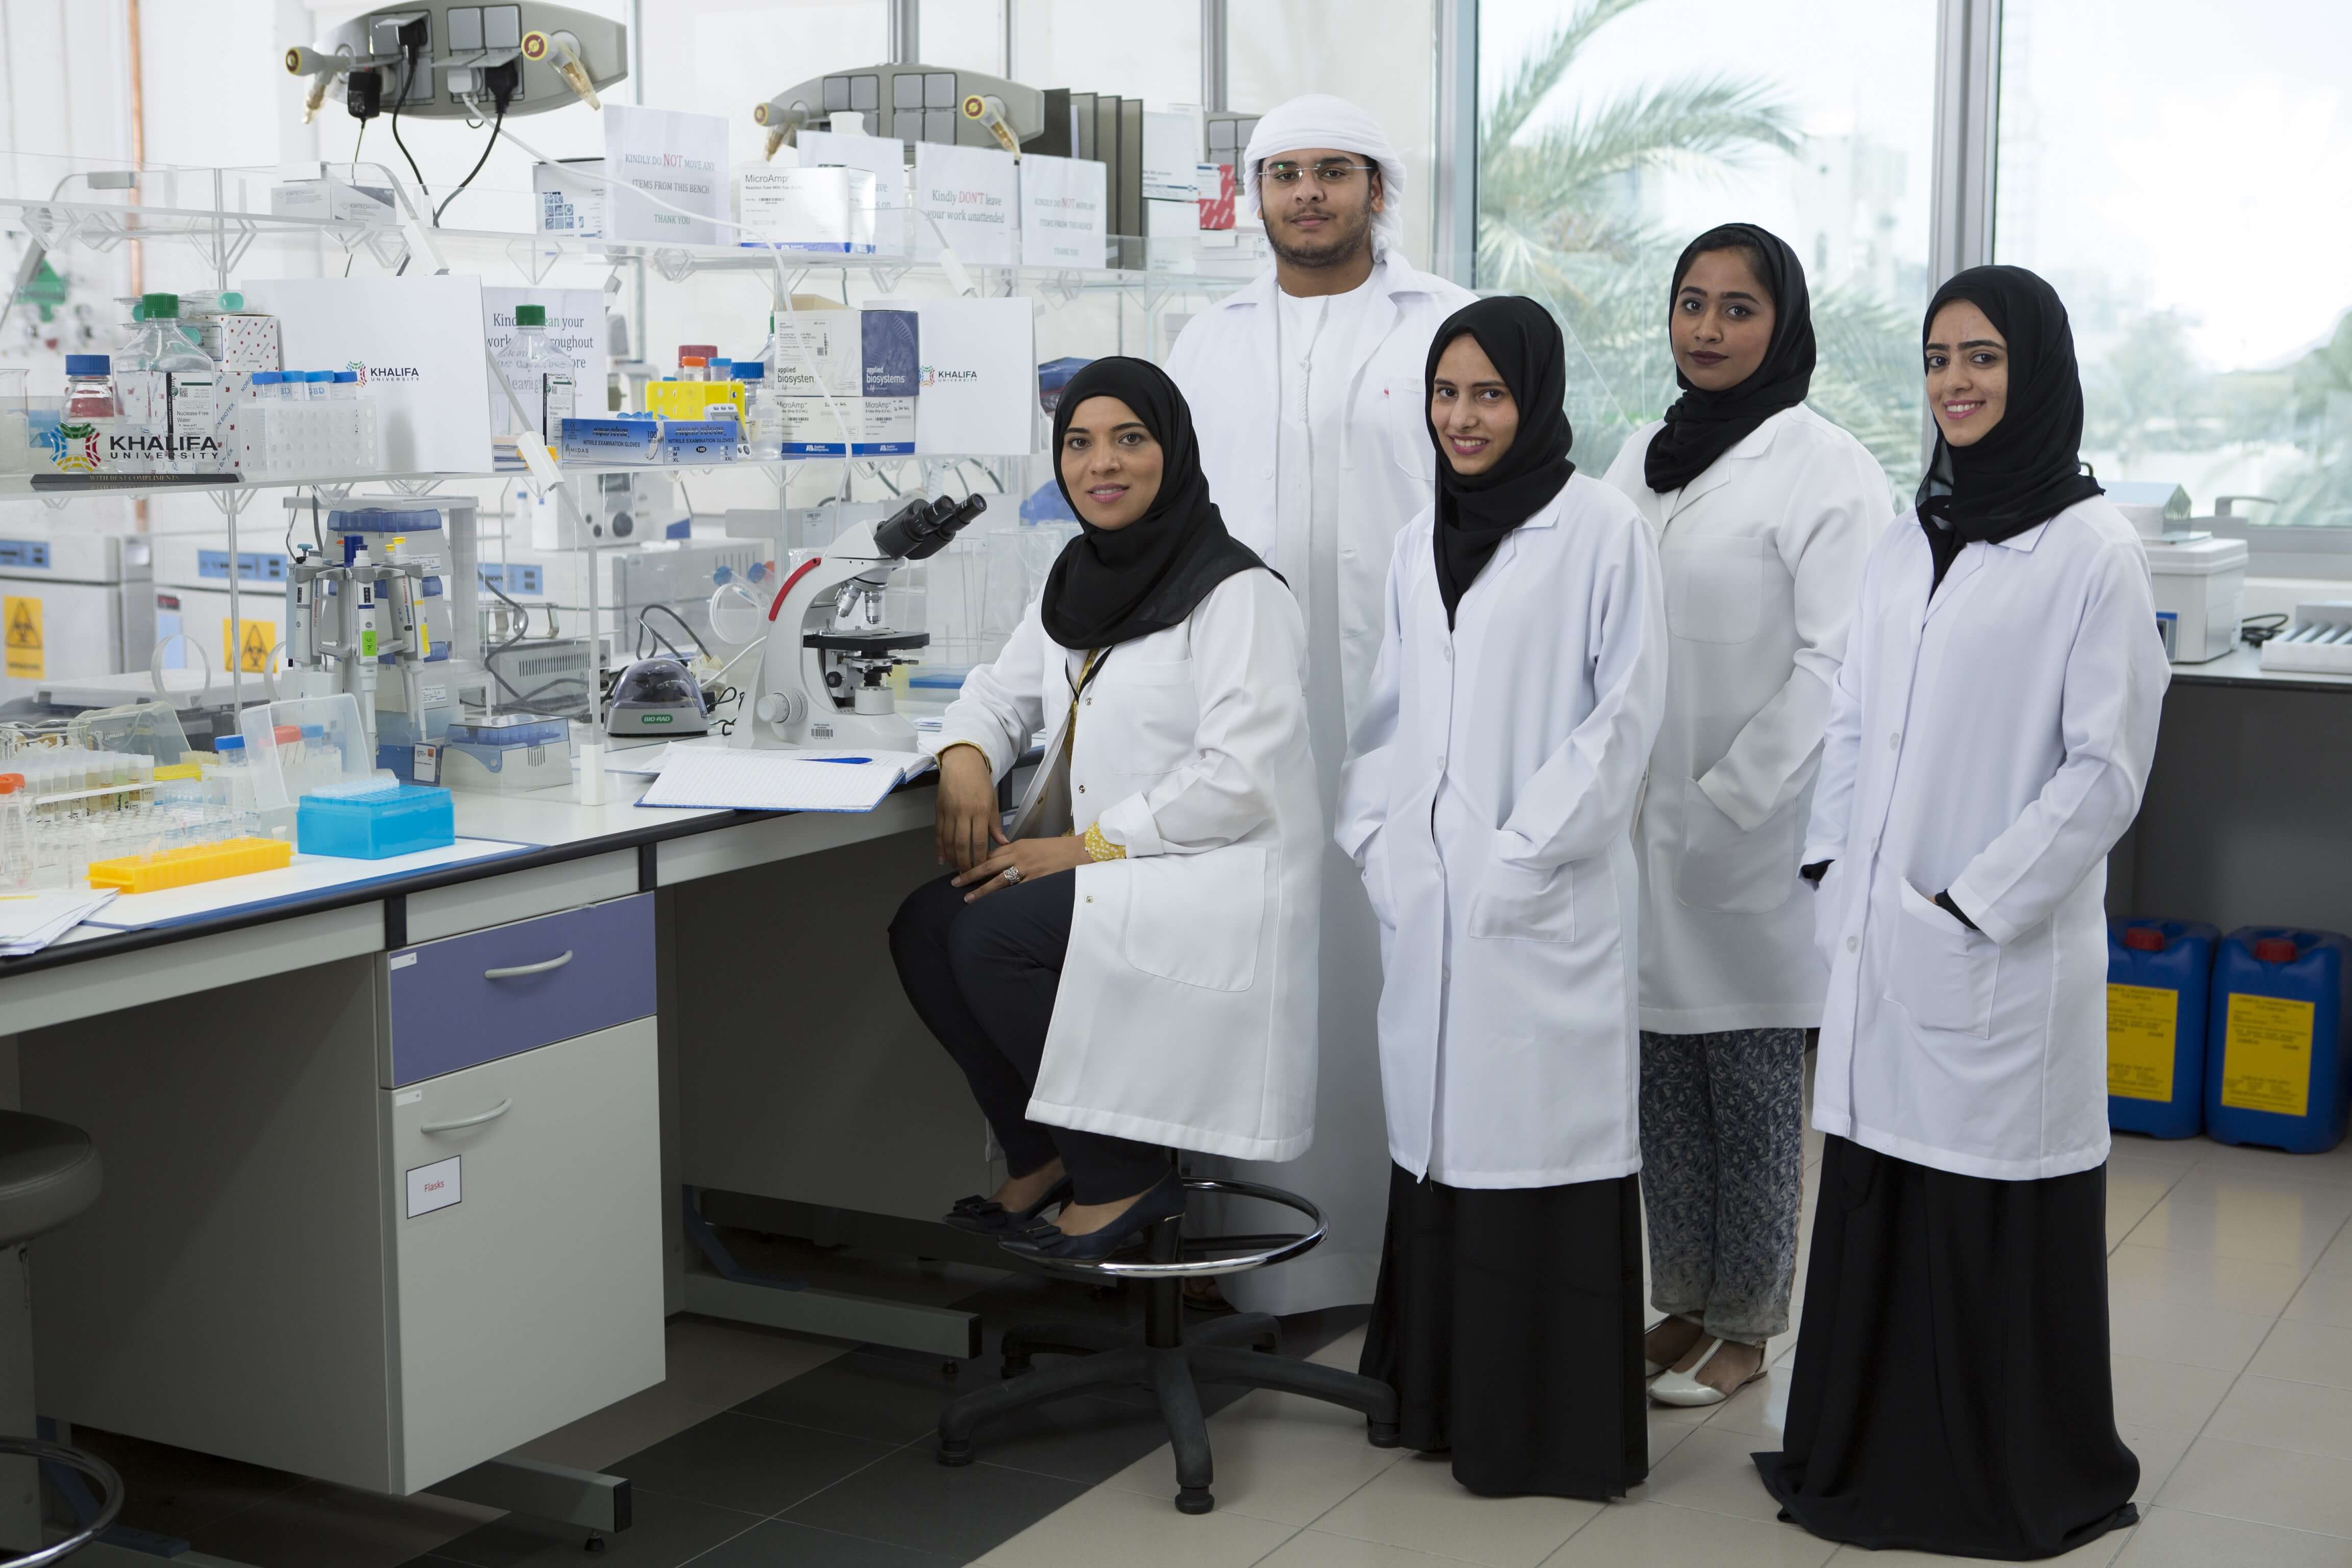 khalifa-university-and-sandooq-al-watan-collaborate-on-biotechnology-project-to-study-genetic-predisposition-to-cancer-in-uae